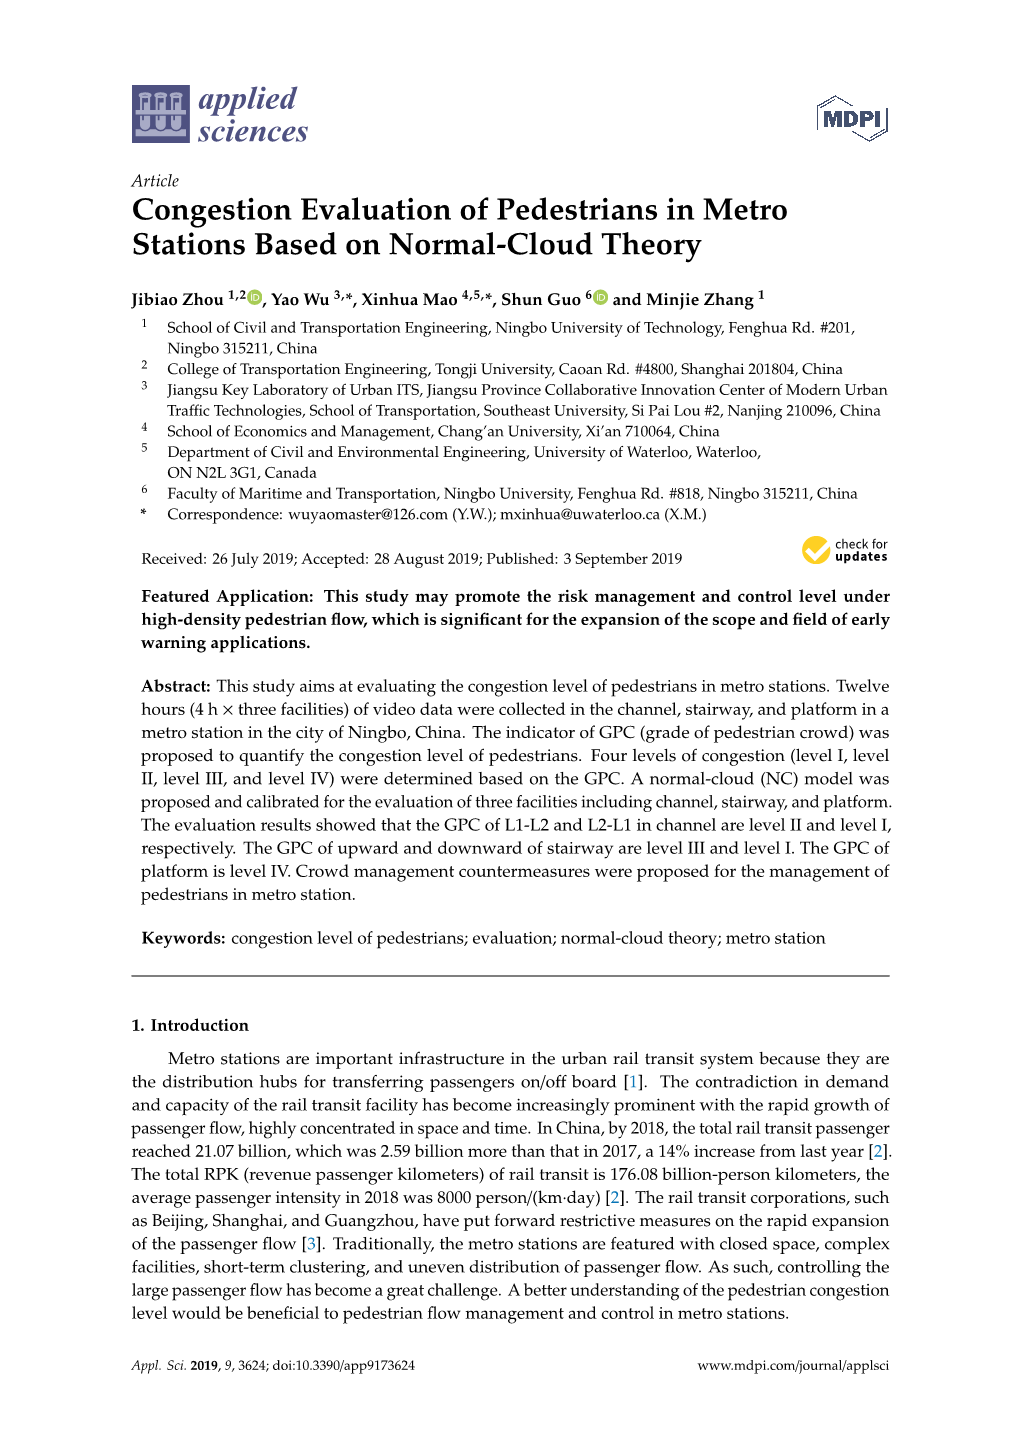 Congestion Evaluation of Pedestrians in Metro Stations Based on Normal-Cloud Theory